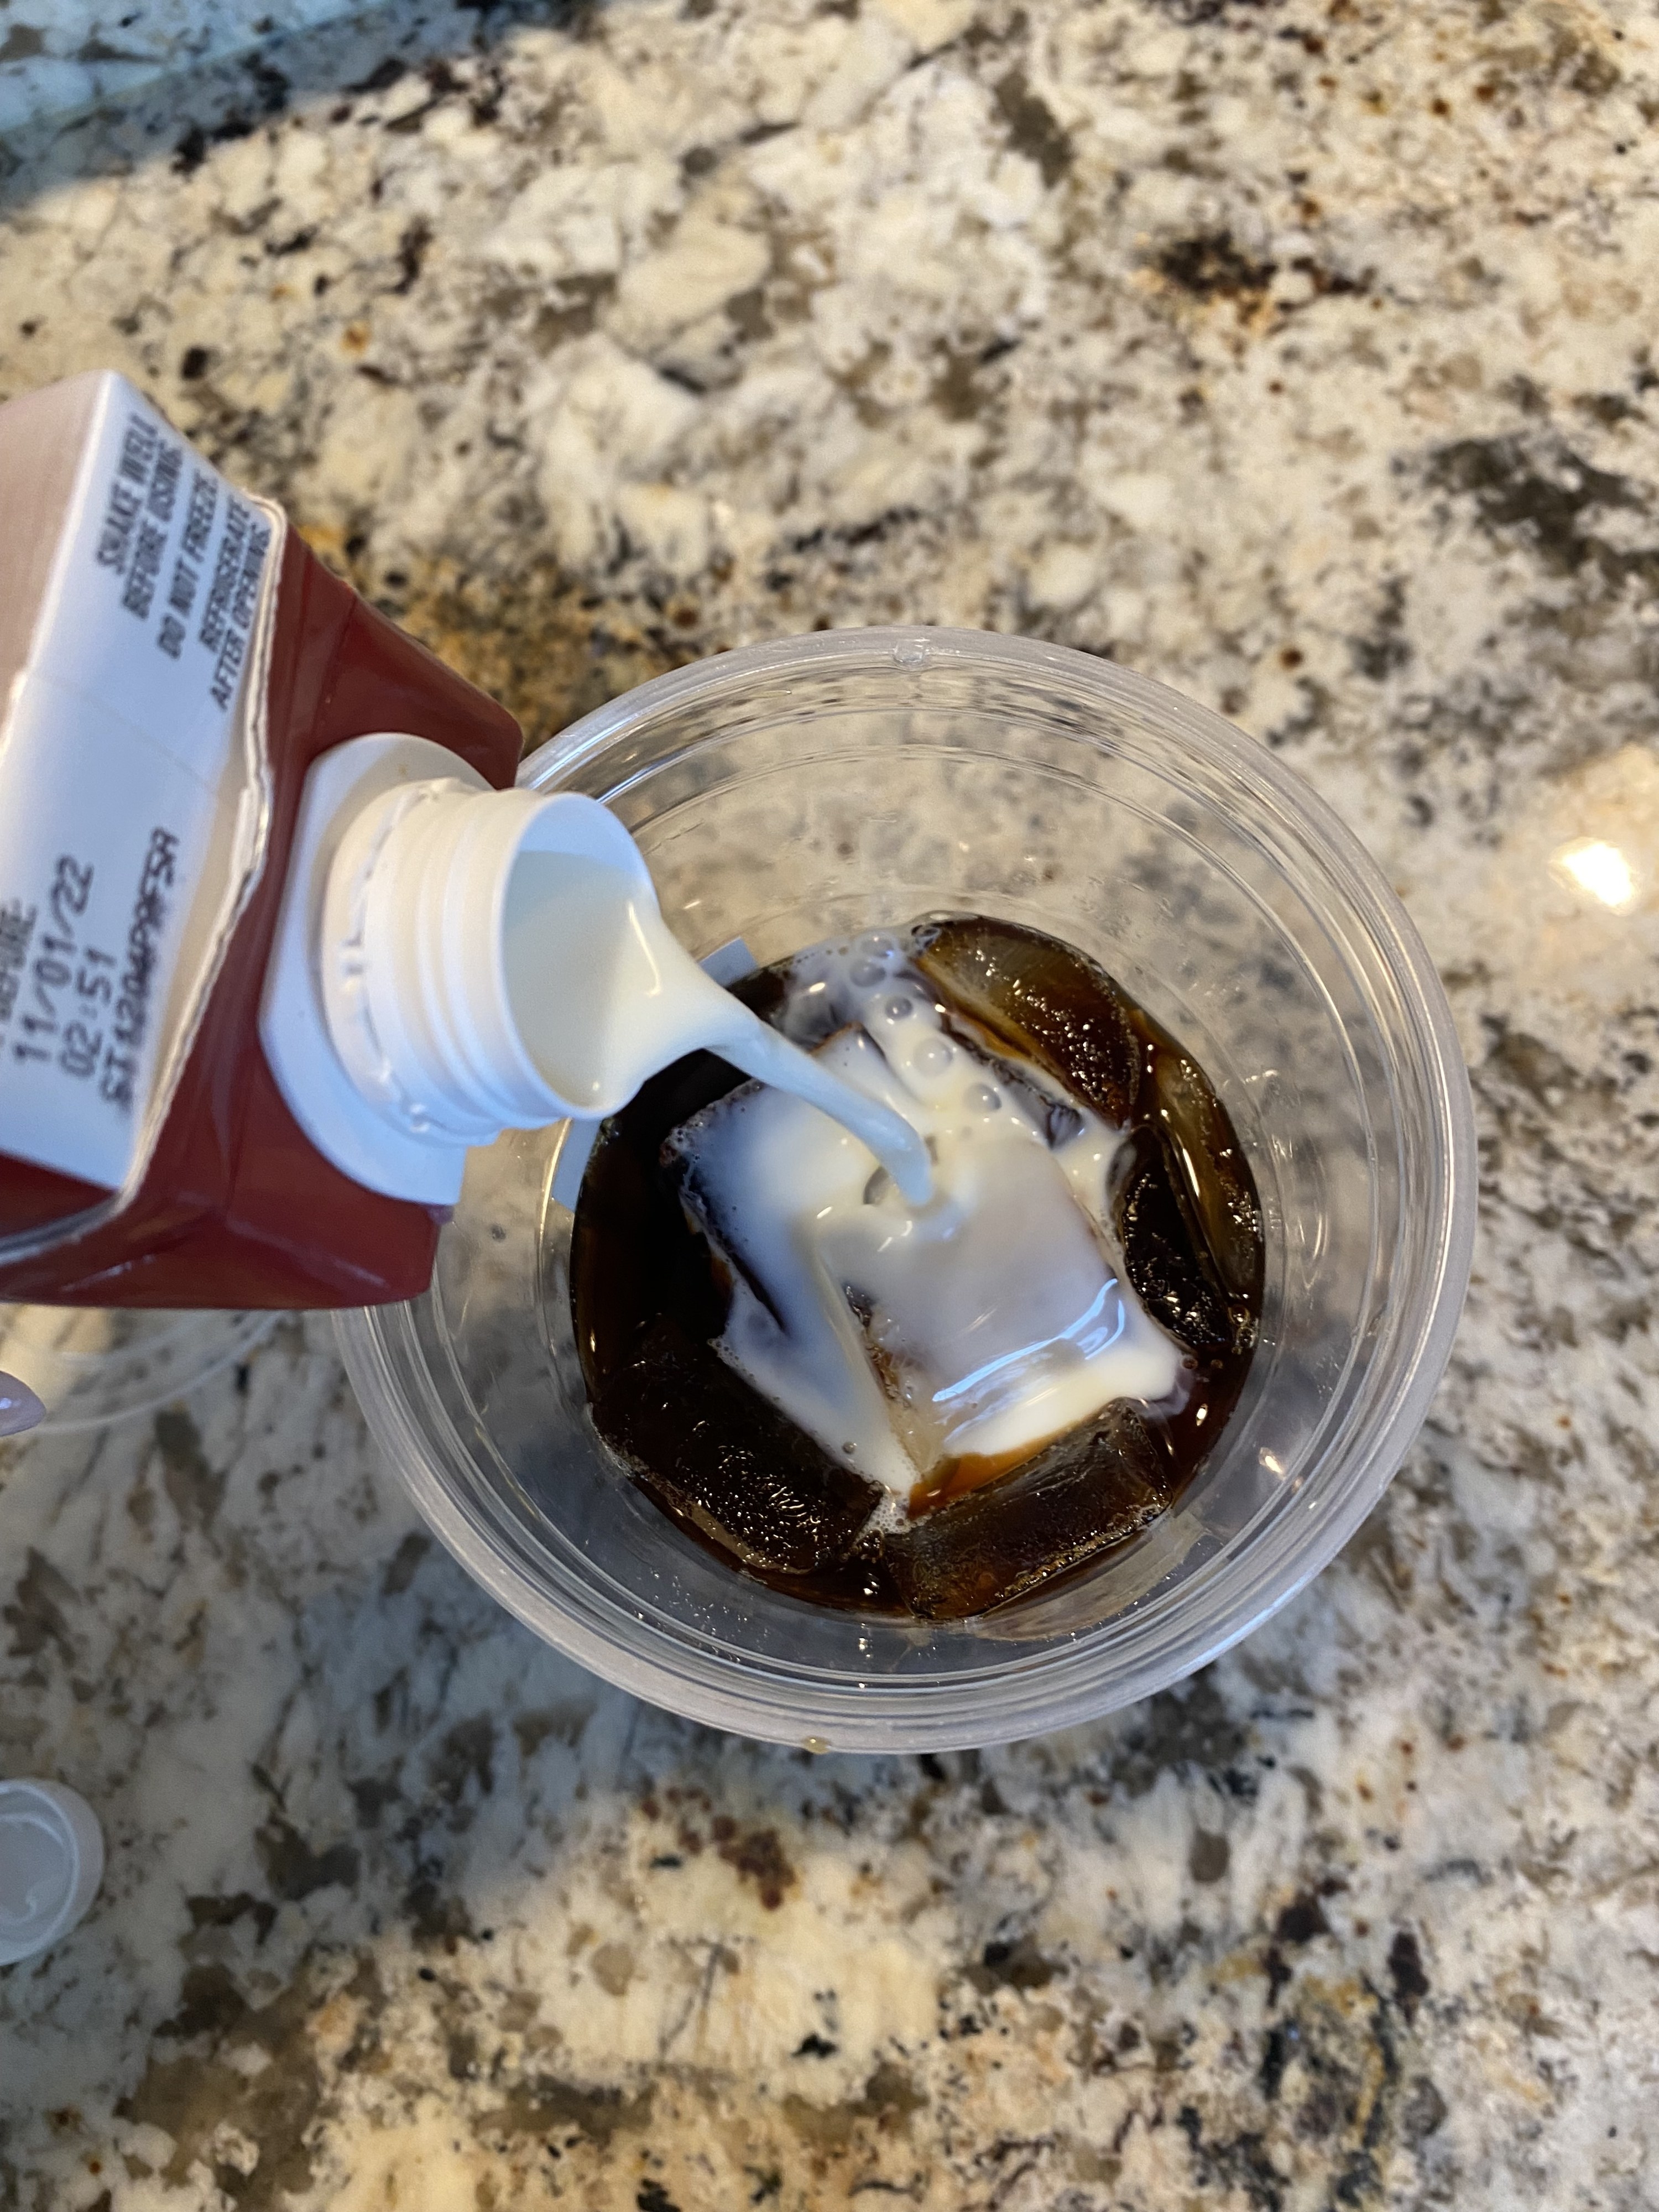 The Quest protein shake being poured into the iced coffee